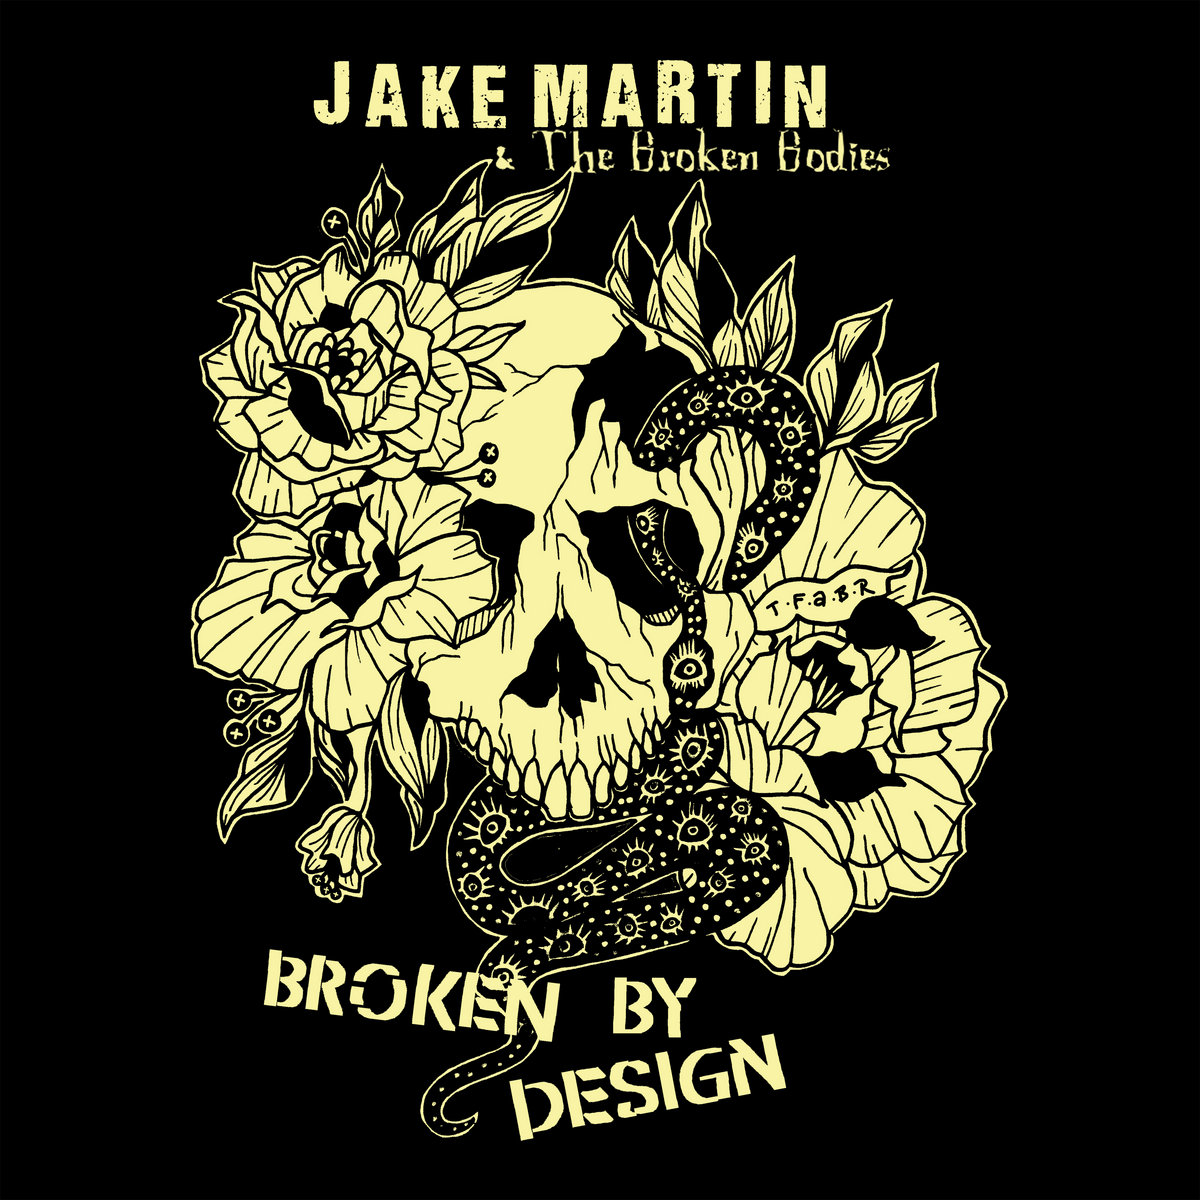 12 days of @jakemartinmuzic sharing 12 tracks from one of my very favourite live artists... 🖤 Day 1: Jake Martin And The Broken Bodies - Posters In Picture Frames youtu.be/IjwKmJONSbE?si…